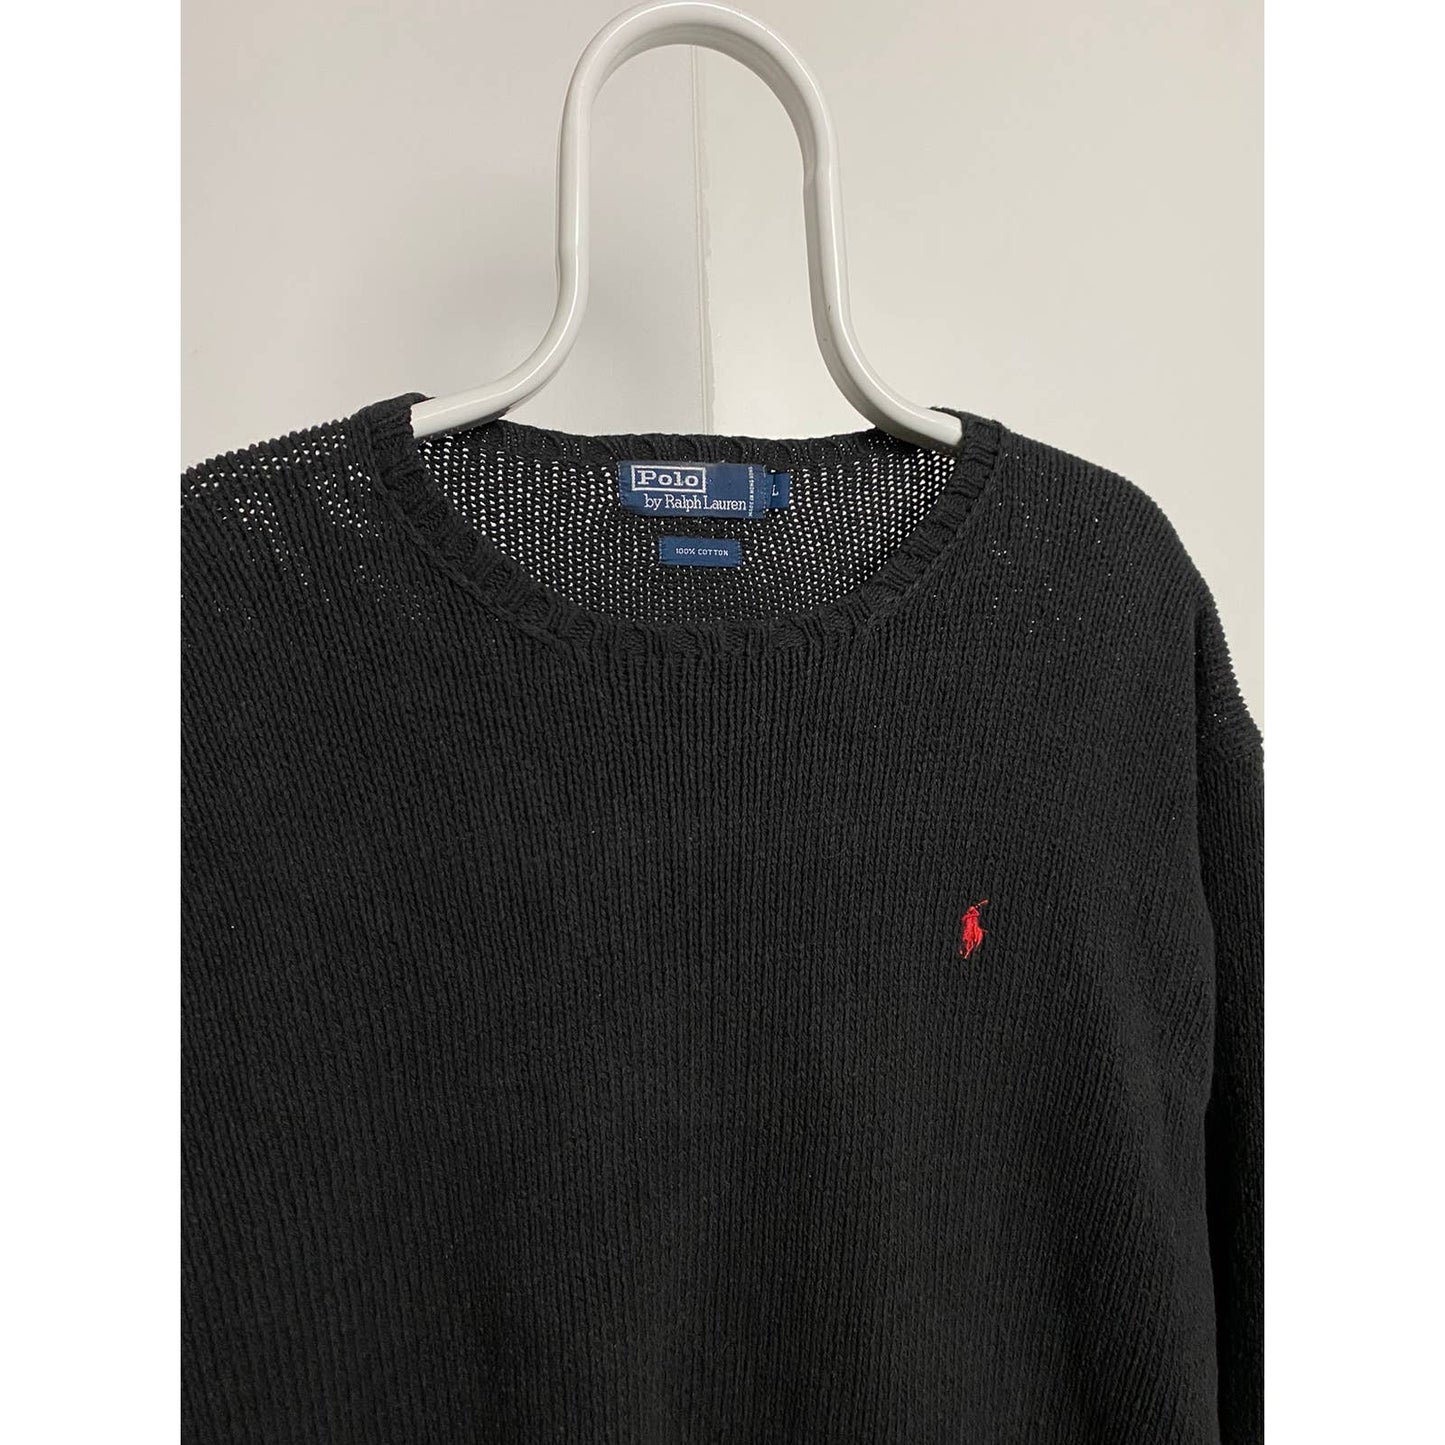 Polo Ralph Lauren vintage black sweater small pony red